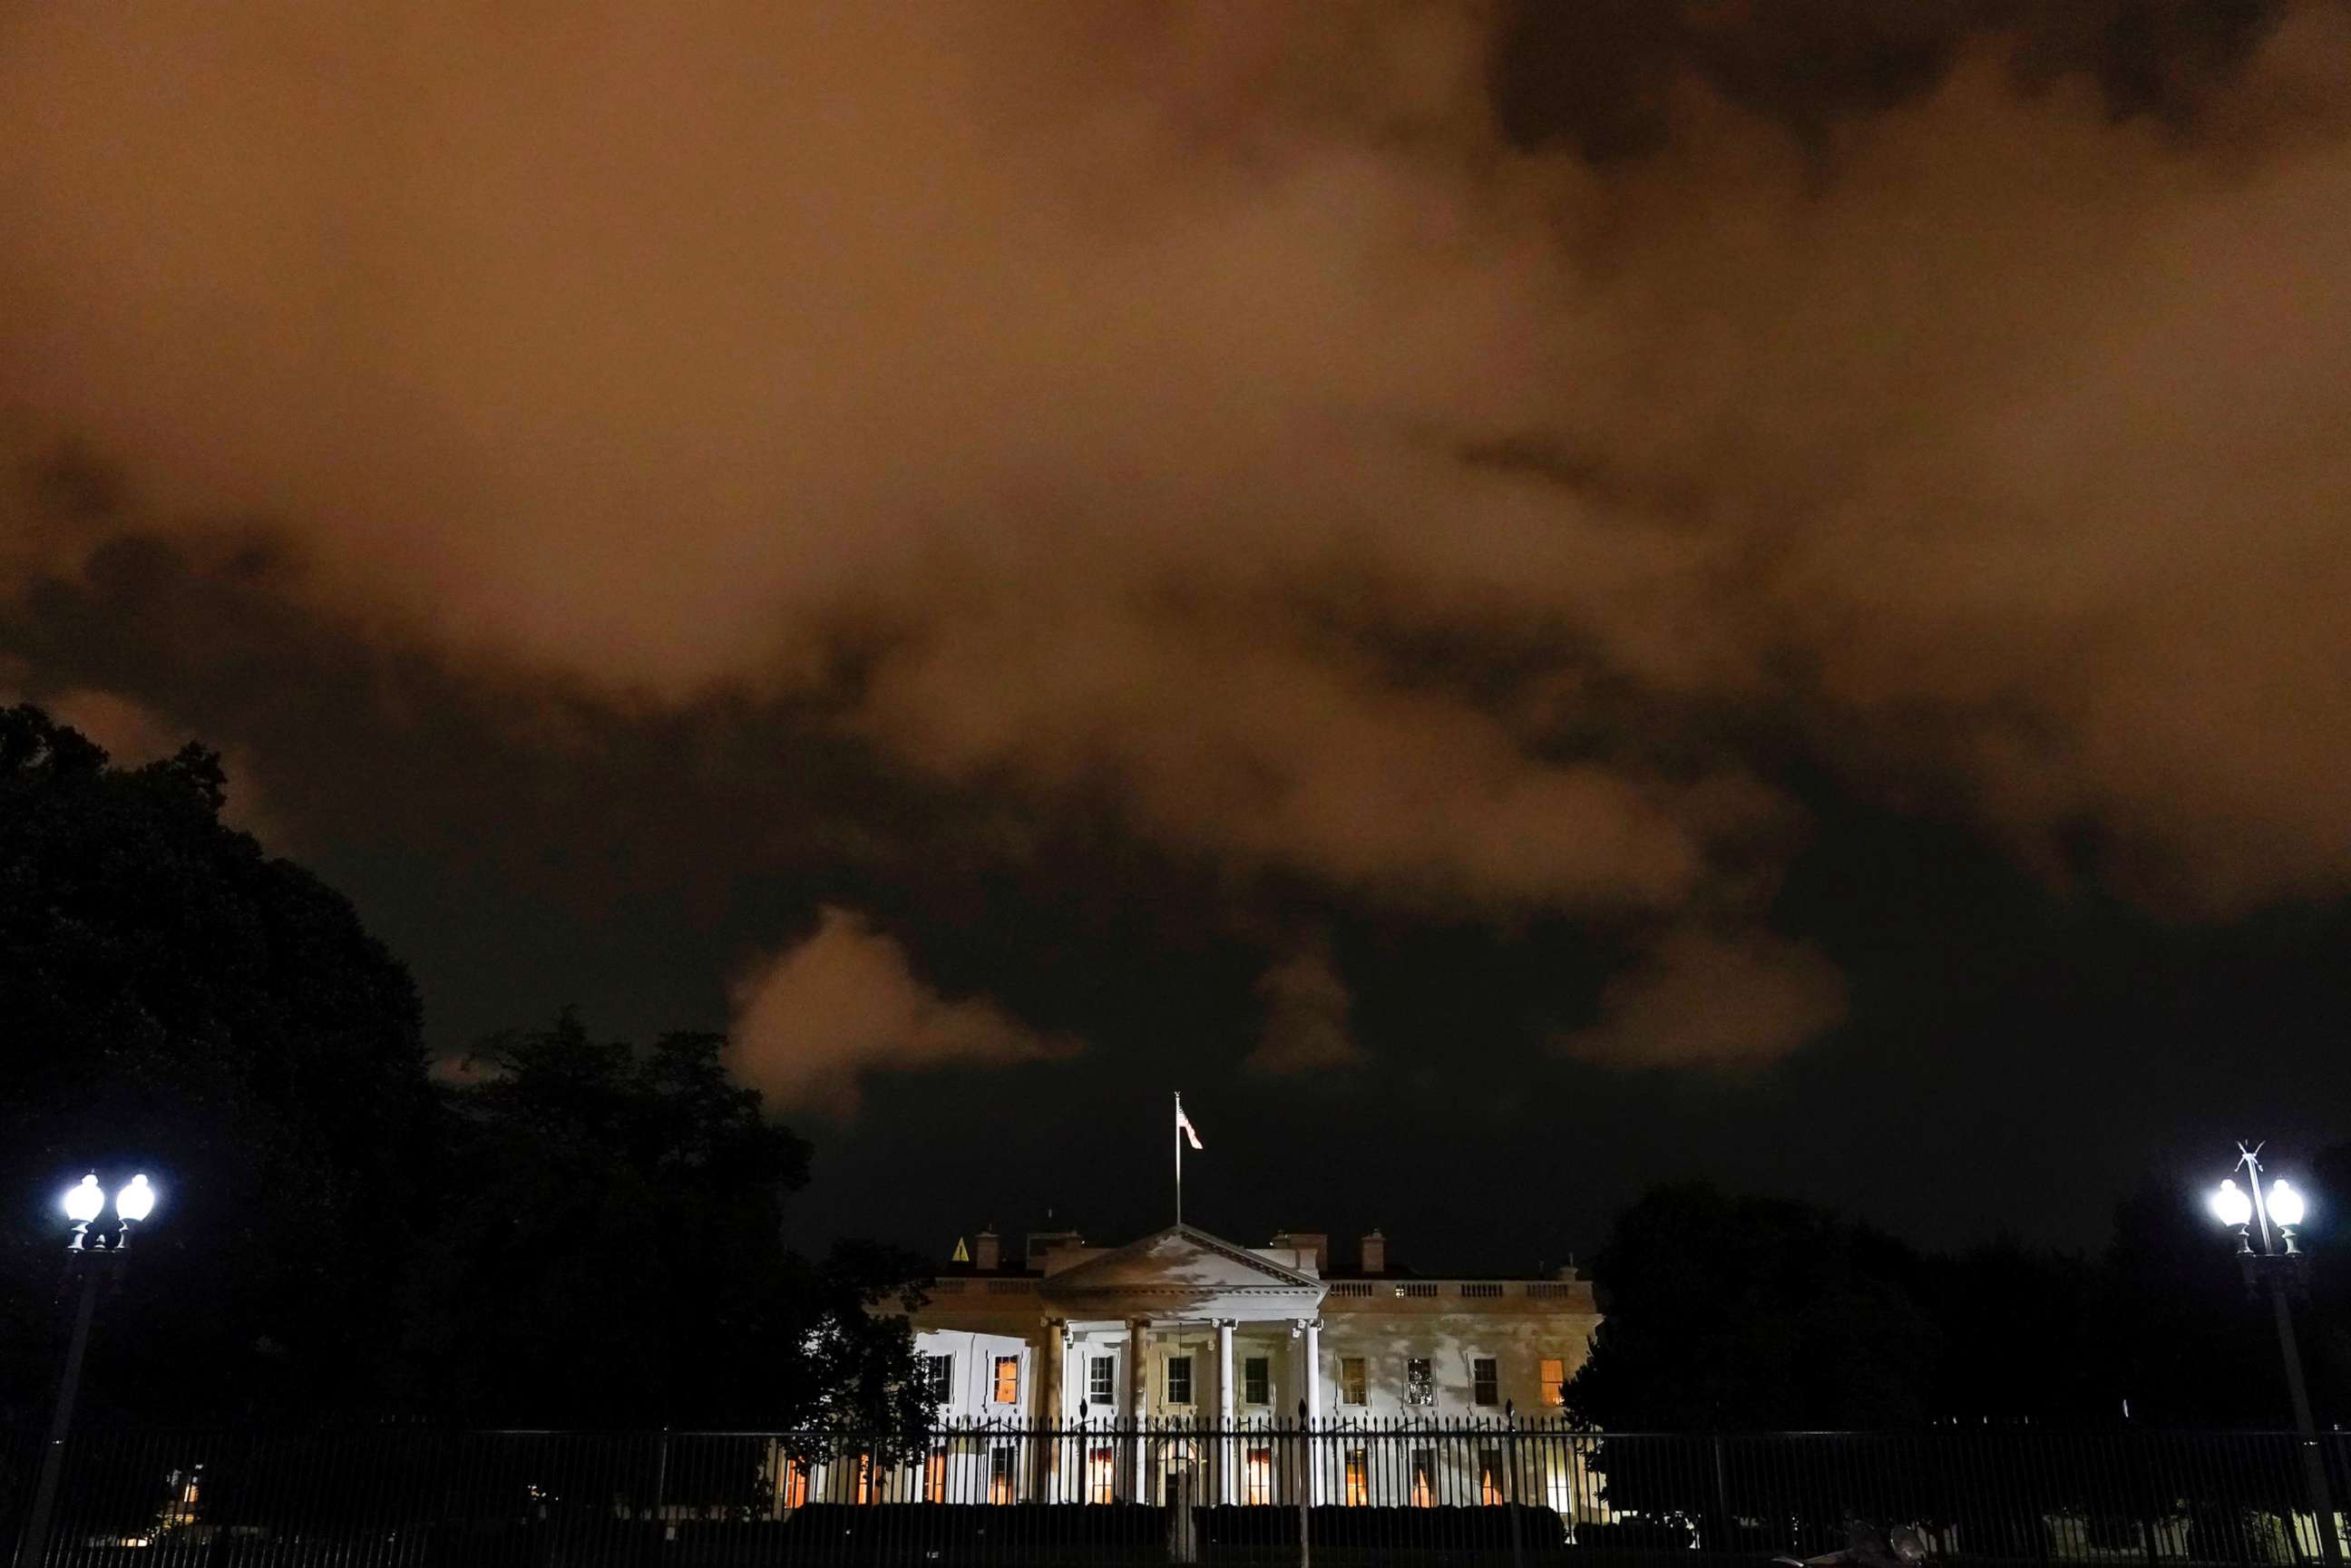 PHOTO: The White House is lit before dawn after President Donald Trump announced that he and first lady Melania Trump have both tested positive for COVID-19 in Washington, D.C., Oct. 2, 2020.